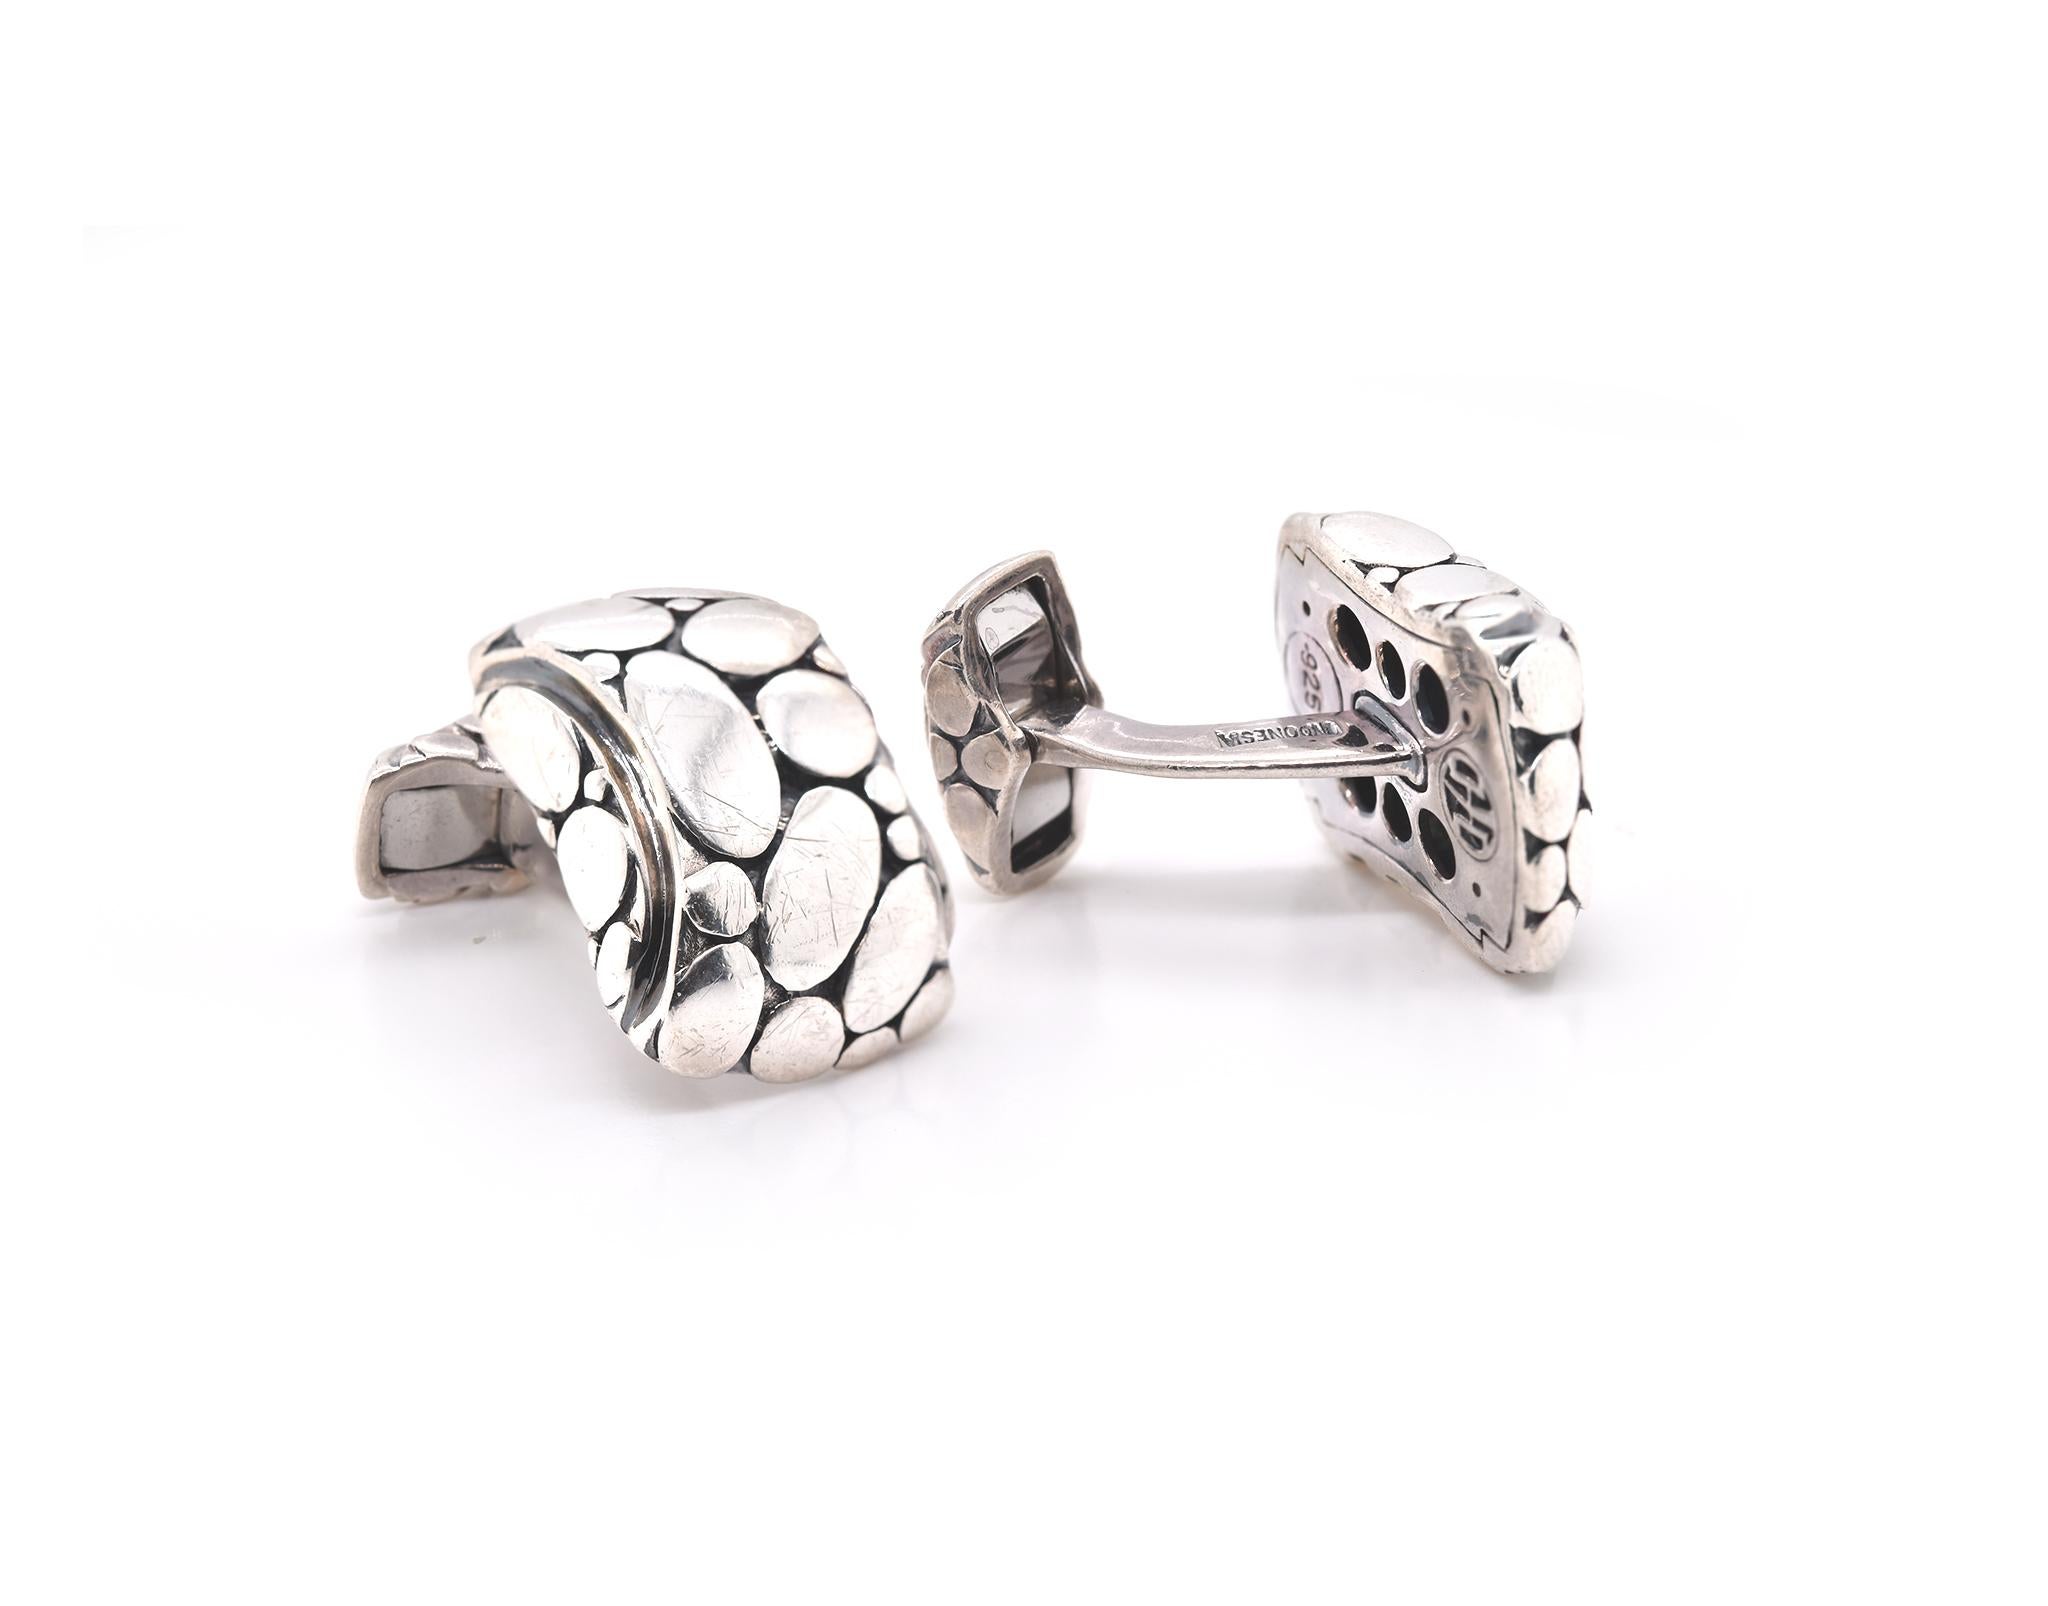 Designer: John Hardy
Material: sterling silver 
Dimensions: cufflinks measure 14.95mm x 21.32mm
Weight: 17.11 grams
